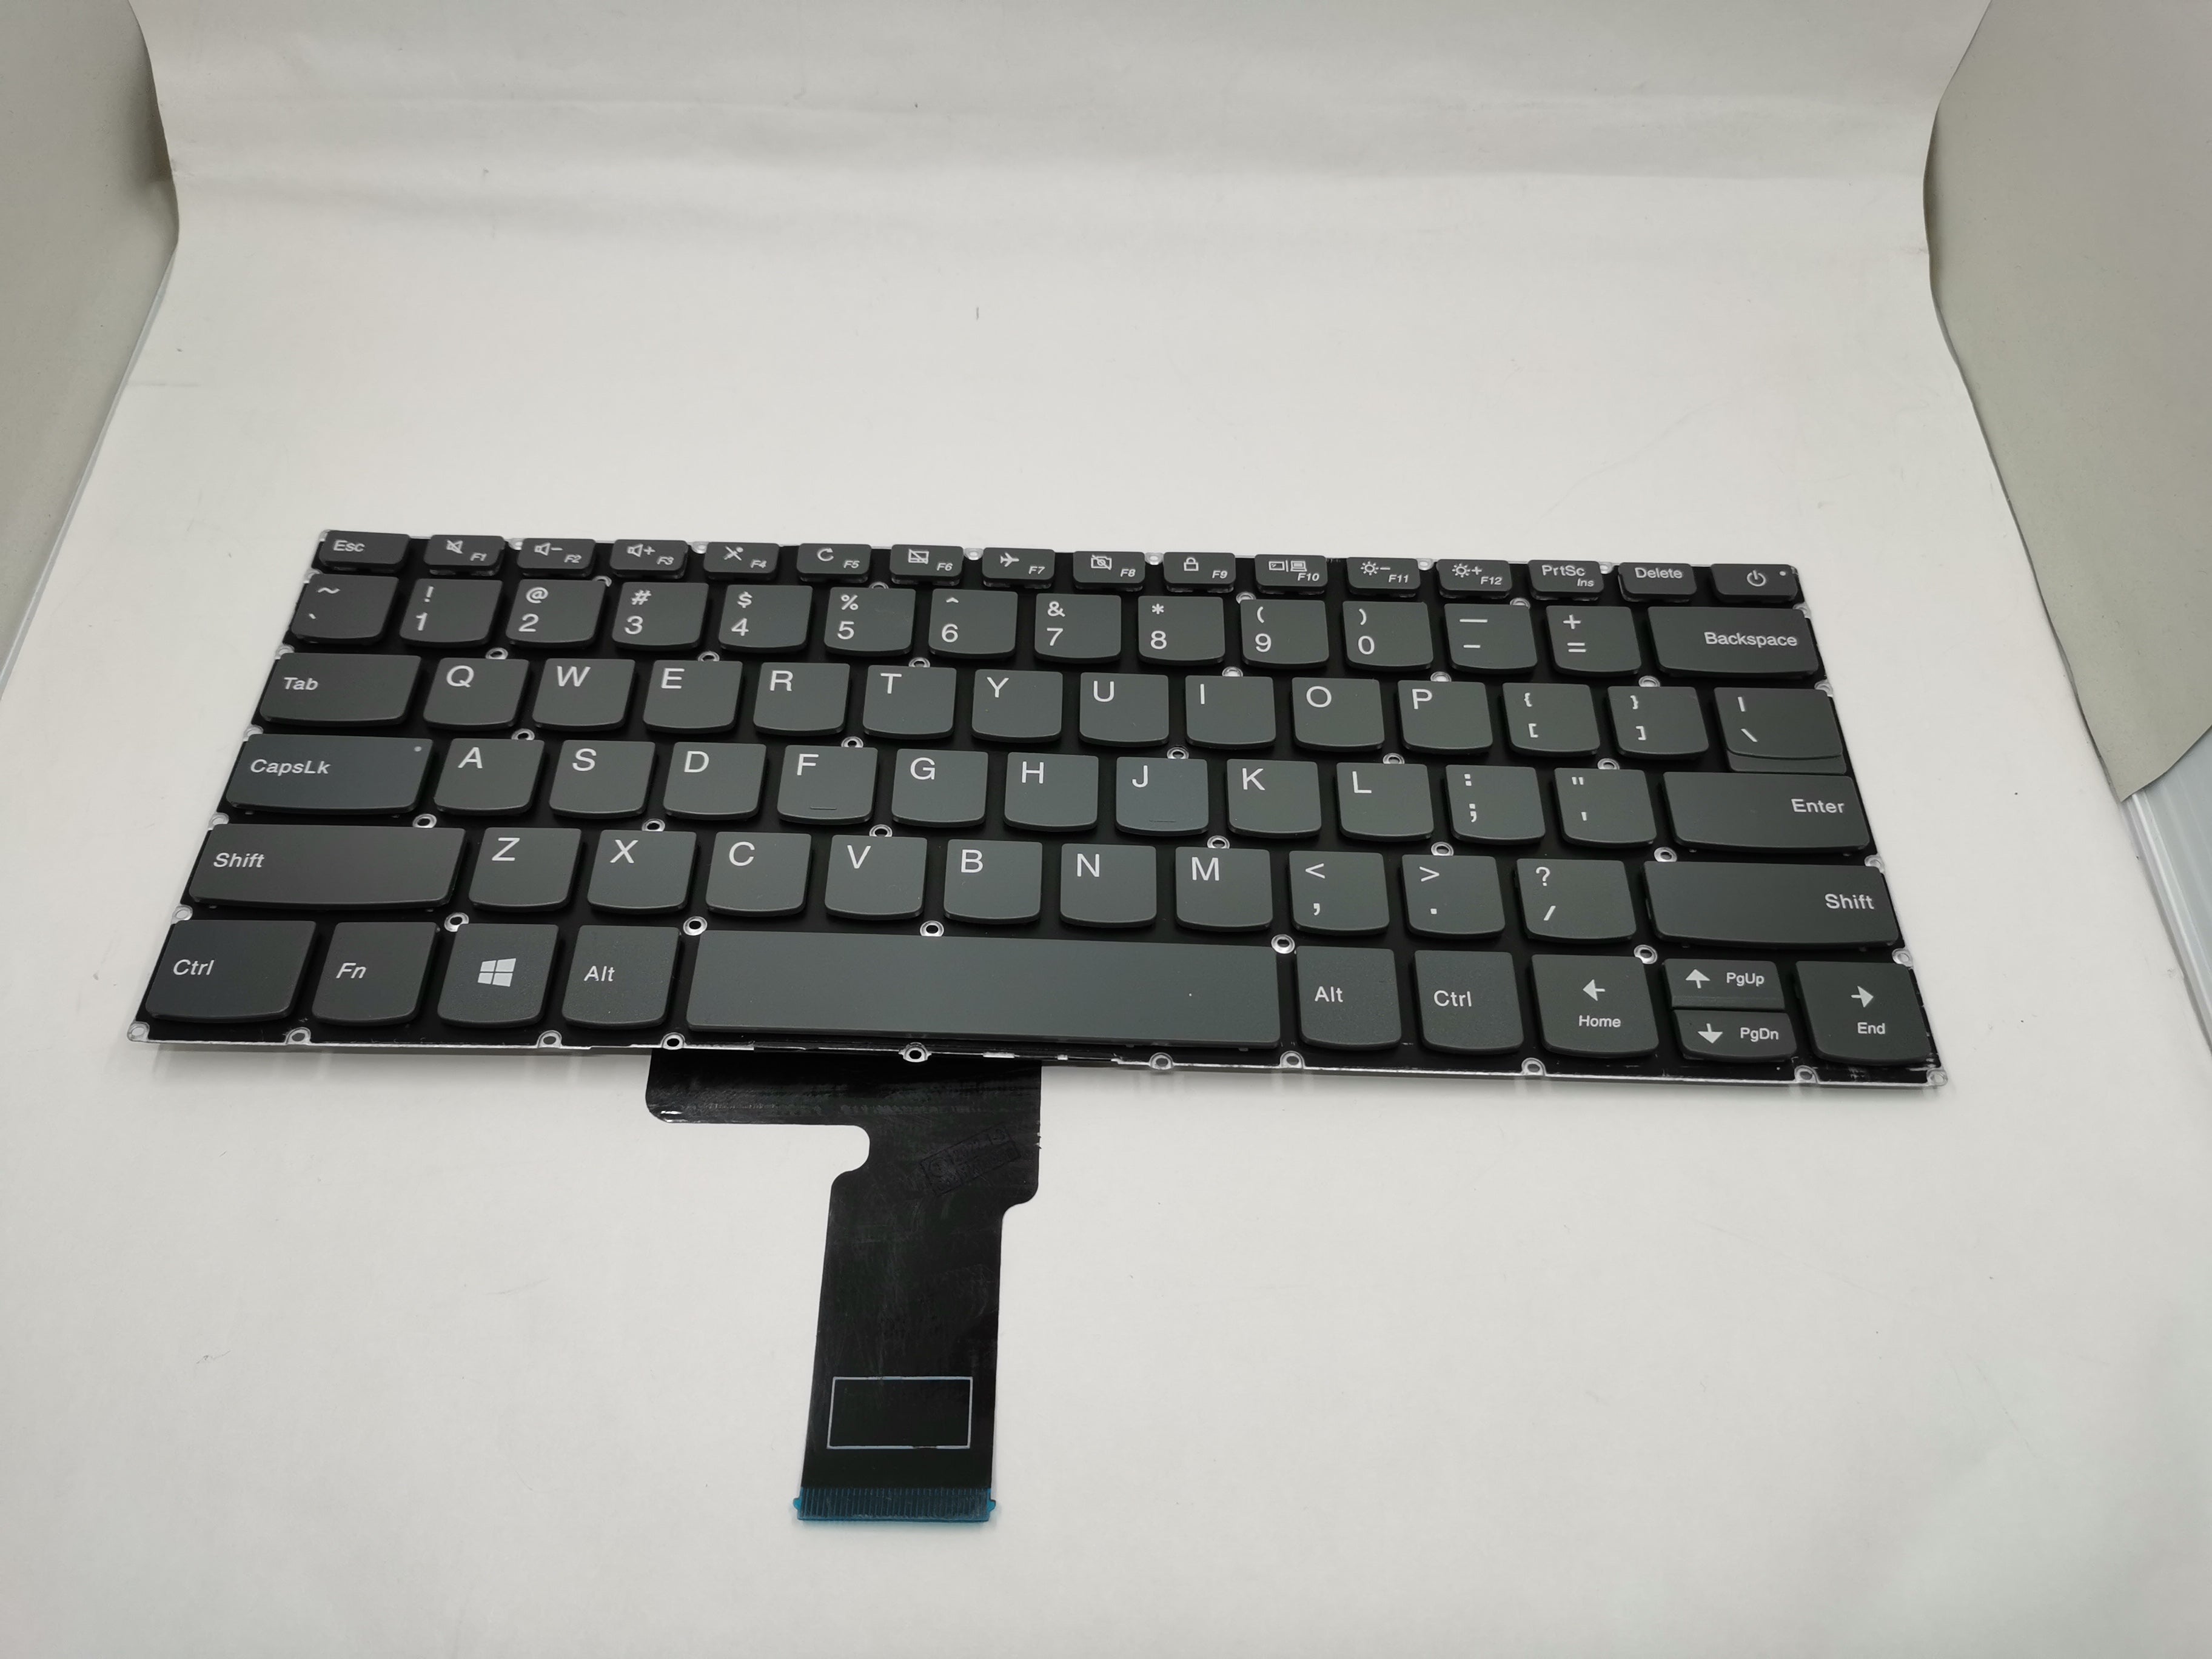 Replacement Keyboard for Lenovo IdeaPad S145-14IKB